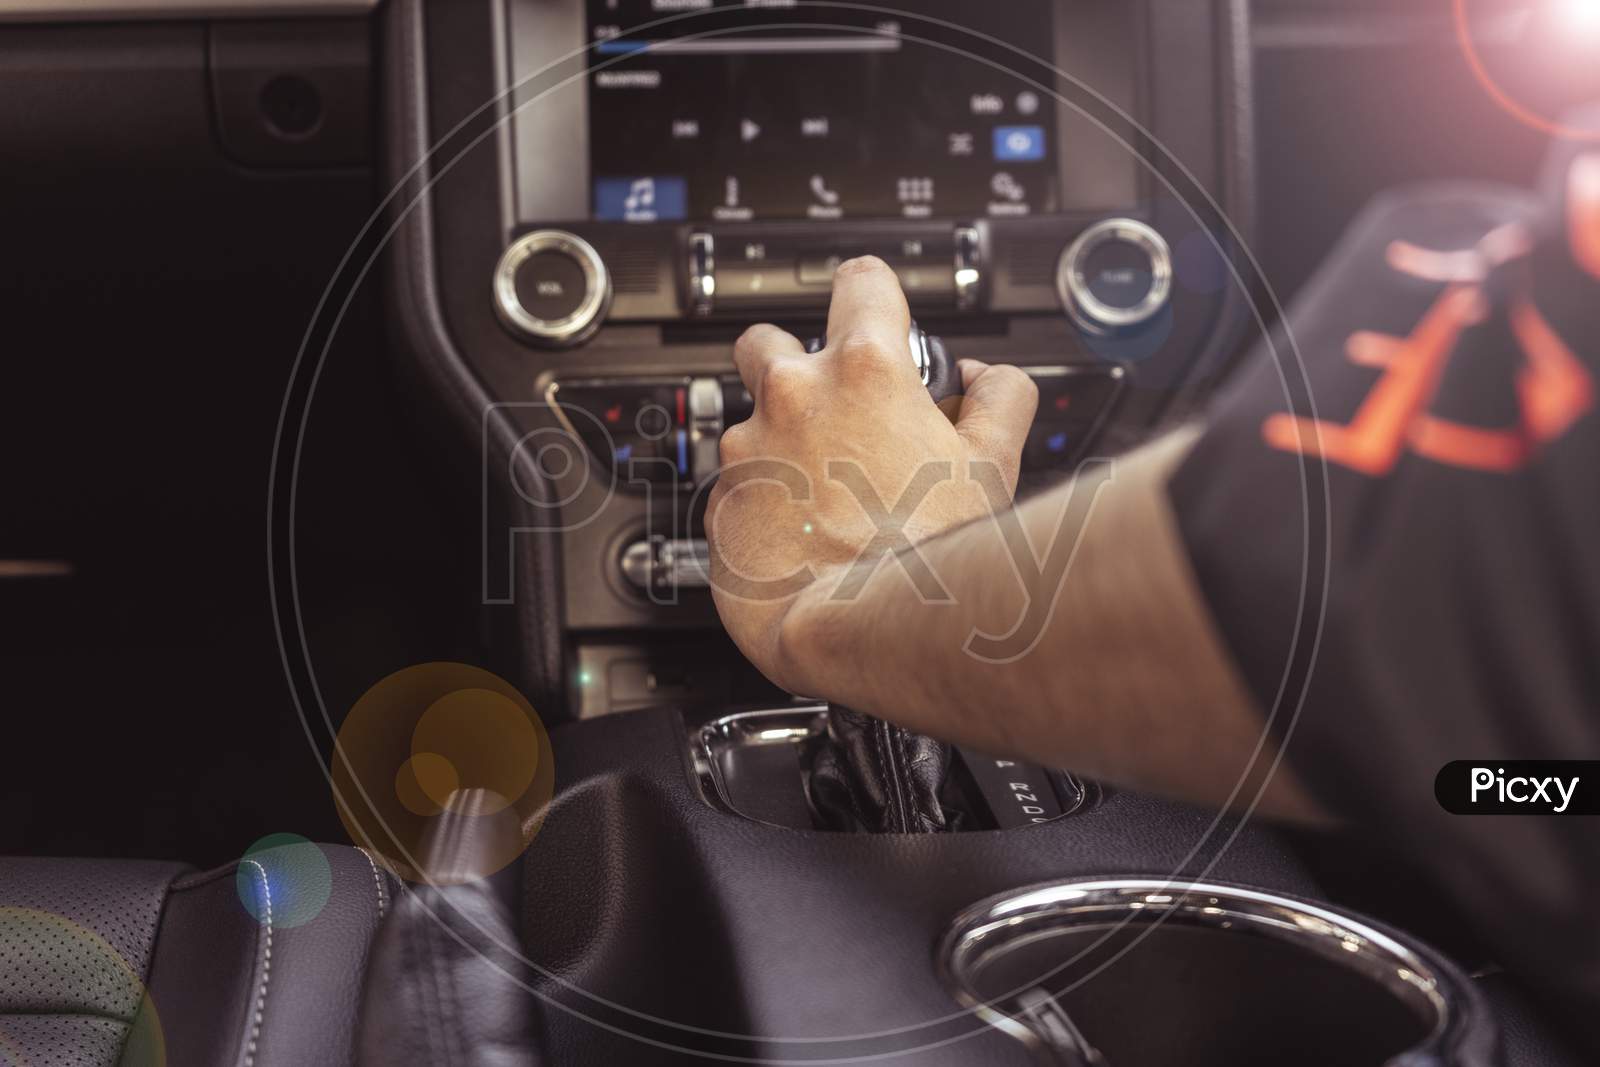 Close Up Of Hands Holding The Gear Of A Car. Interior Of A Luxury Car.